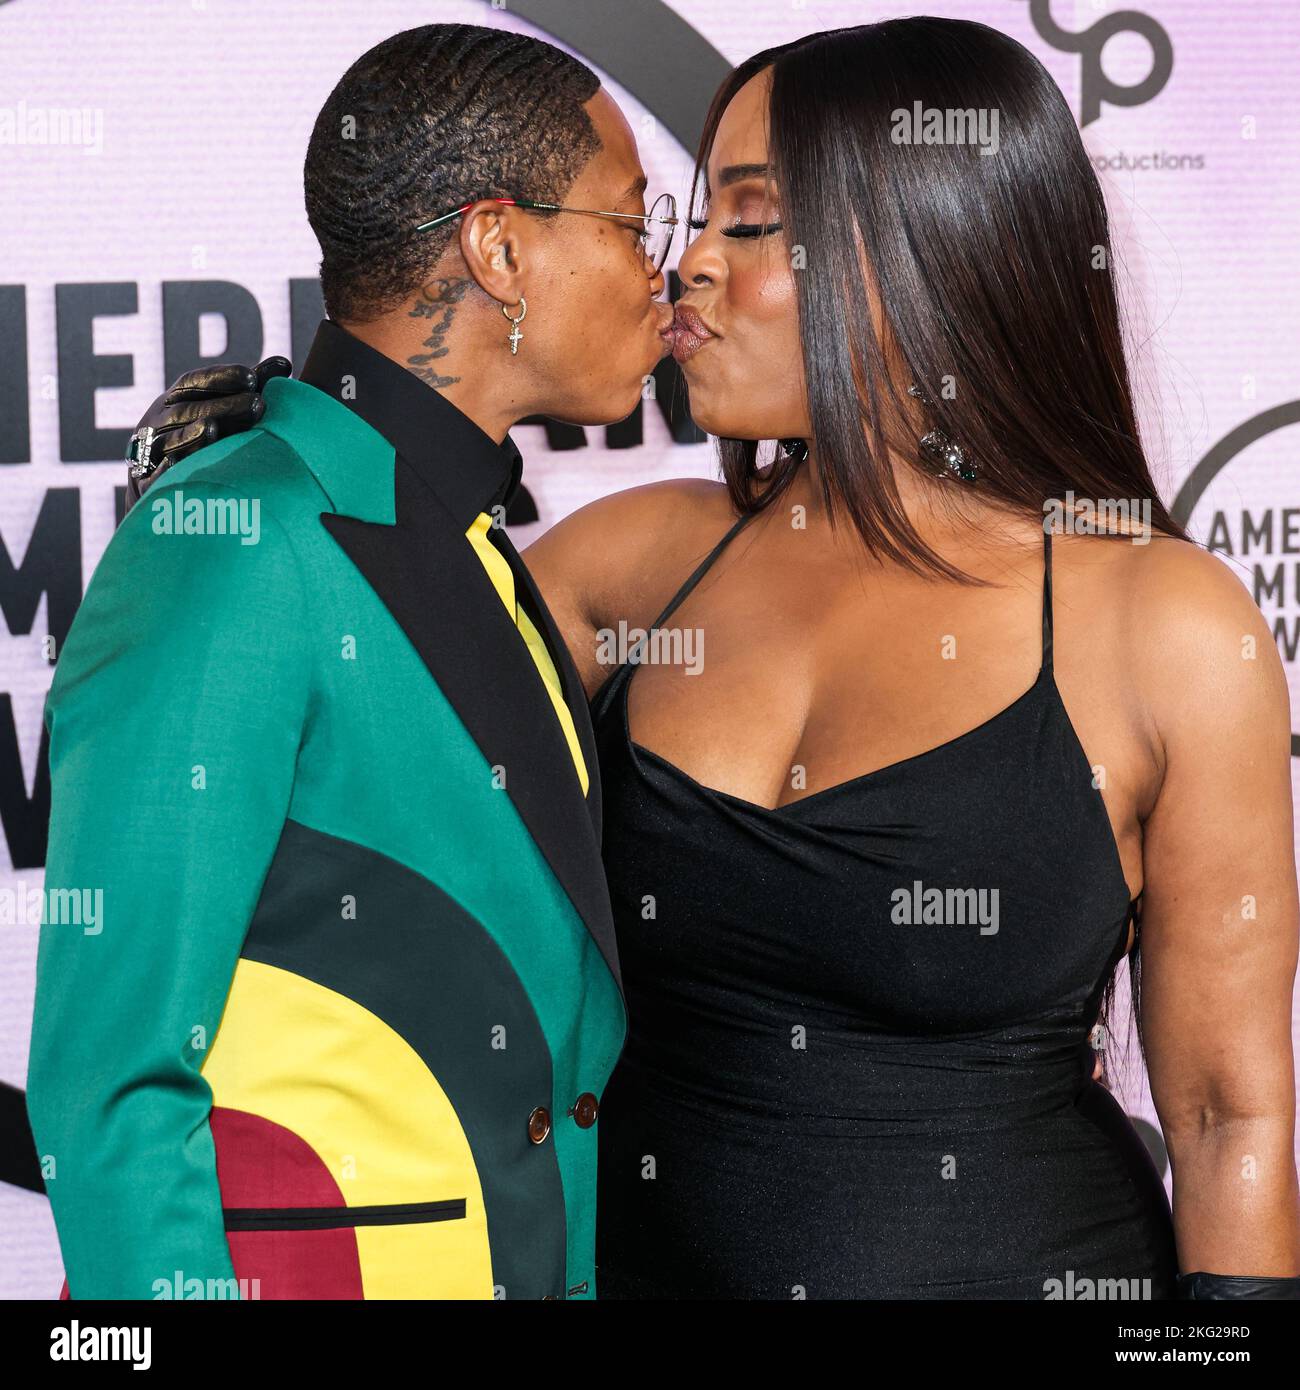 Los Angeles, United States. 20th Nov, 2022. LOS ANGELES, CALIFORNIA, USA - NOVEMBER 20: Jessica Betts and wife Niecy Nash Betts arrive at the 2022 American Music Awards (50th Annual American Music Awards) held at Microsoft Theater at L.A. Live on November 20, 2022 in Los Angeles, California, United States. (Photo by Xavier Collin/Image Press Agency) Credit: Image Press Agency/Alamy Live News Stock Photo